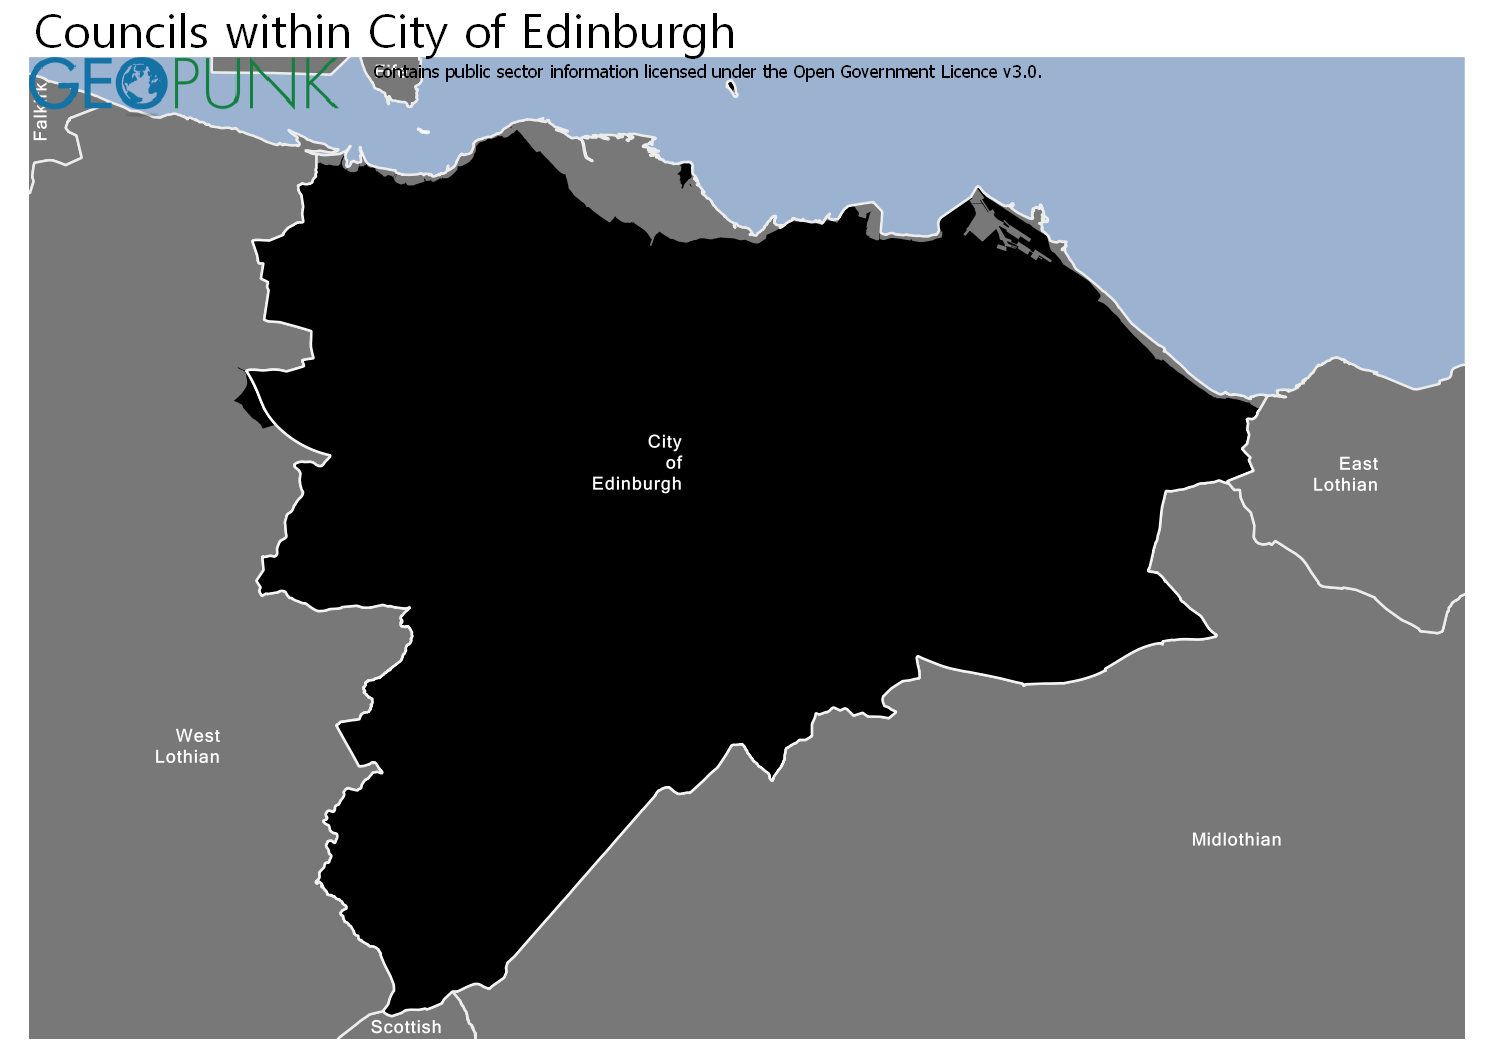 map-and-details-for-city-of-edinburgh-local-authority